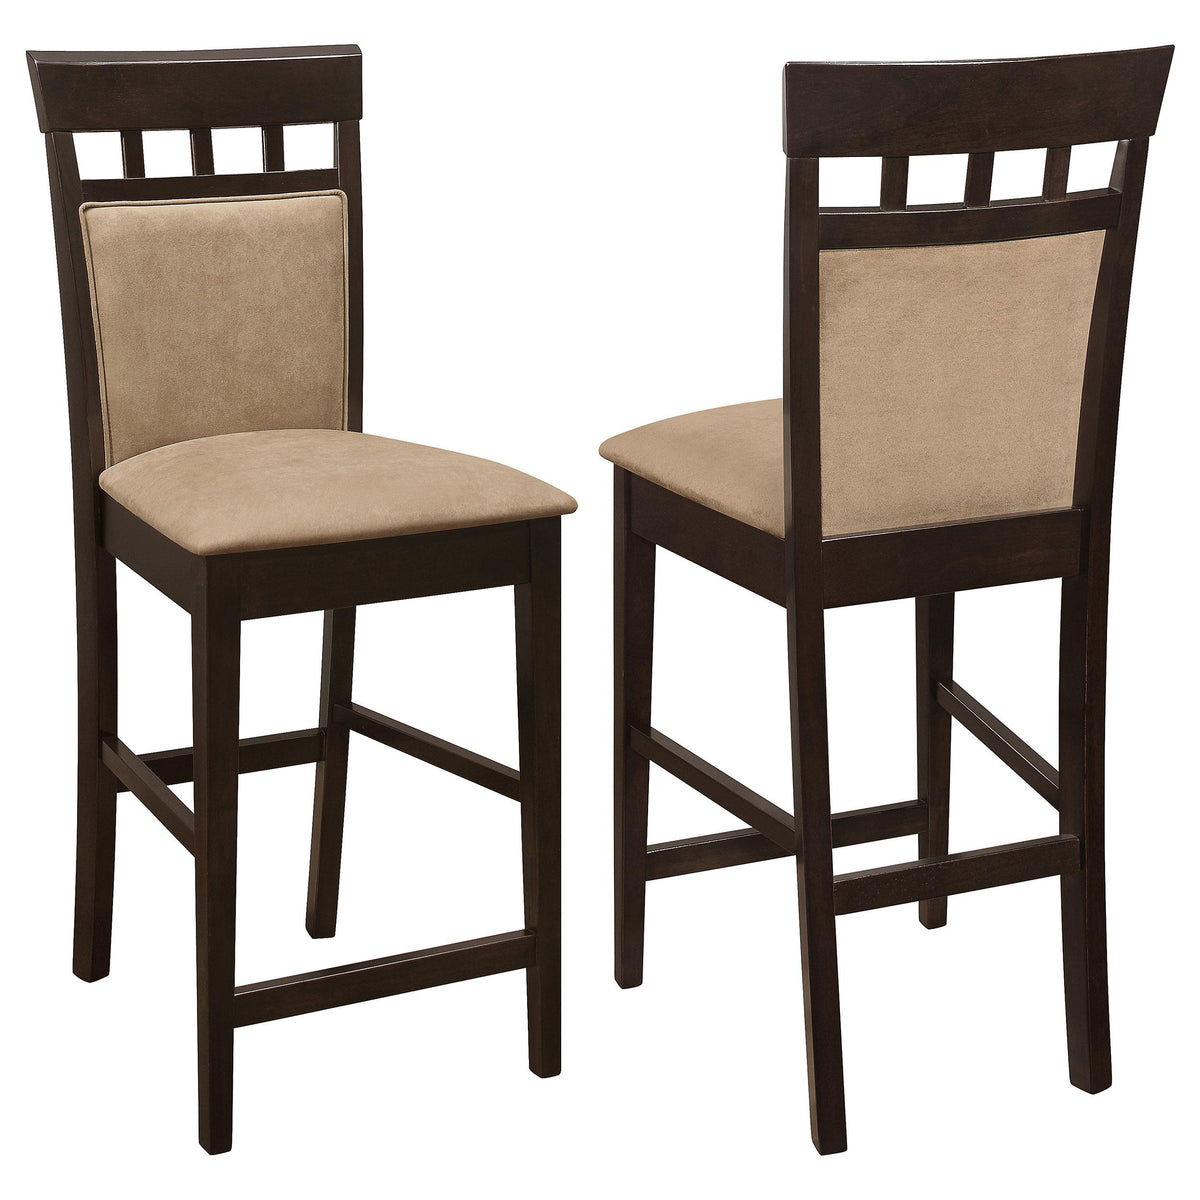 Gabriel Upholstered Counter Height Stools Cappuccino and Beige (Set of 2) Gabriel Upholstered Counter Height Stools Cappuccino and Beige (Set of 2) Half Price Furniture